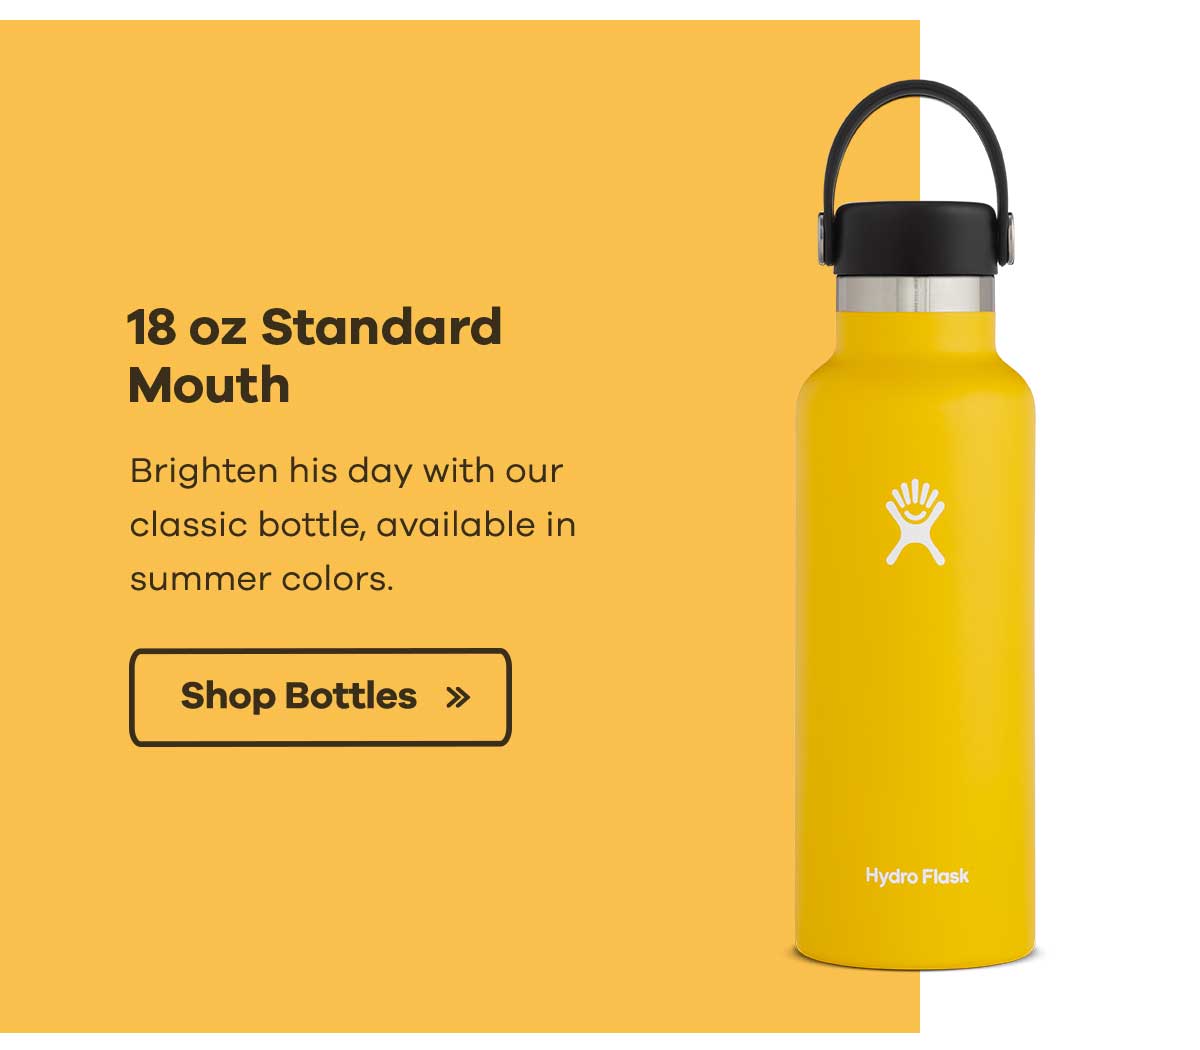 18 oz Standard Mouth - Brighten his day with our classic bottle, available in summer colors. | Shop Bottles >>